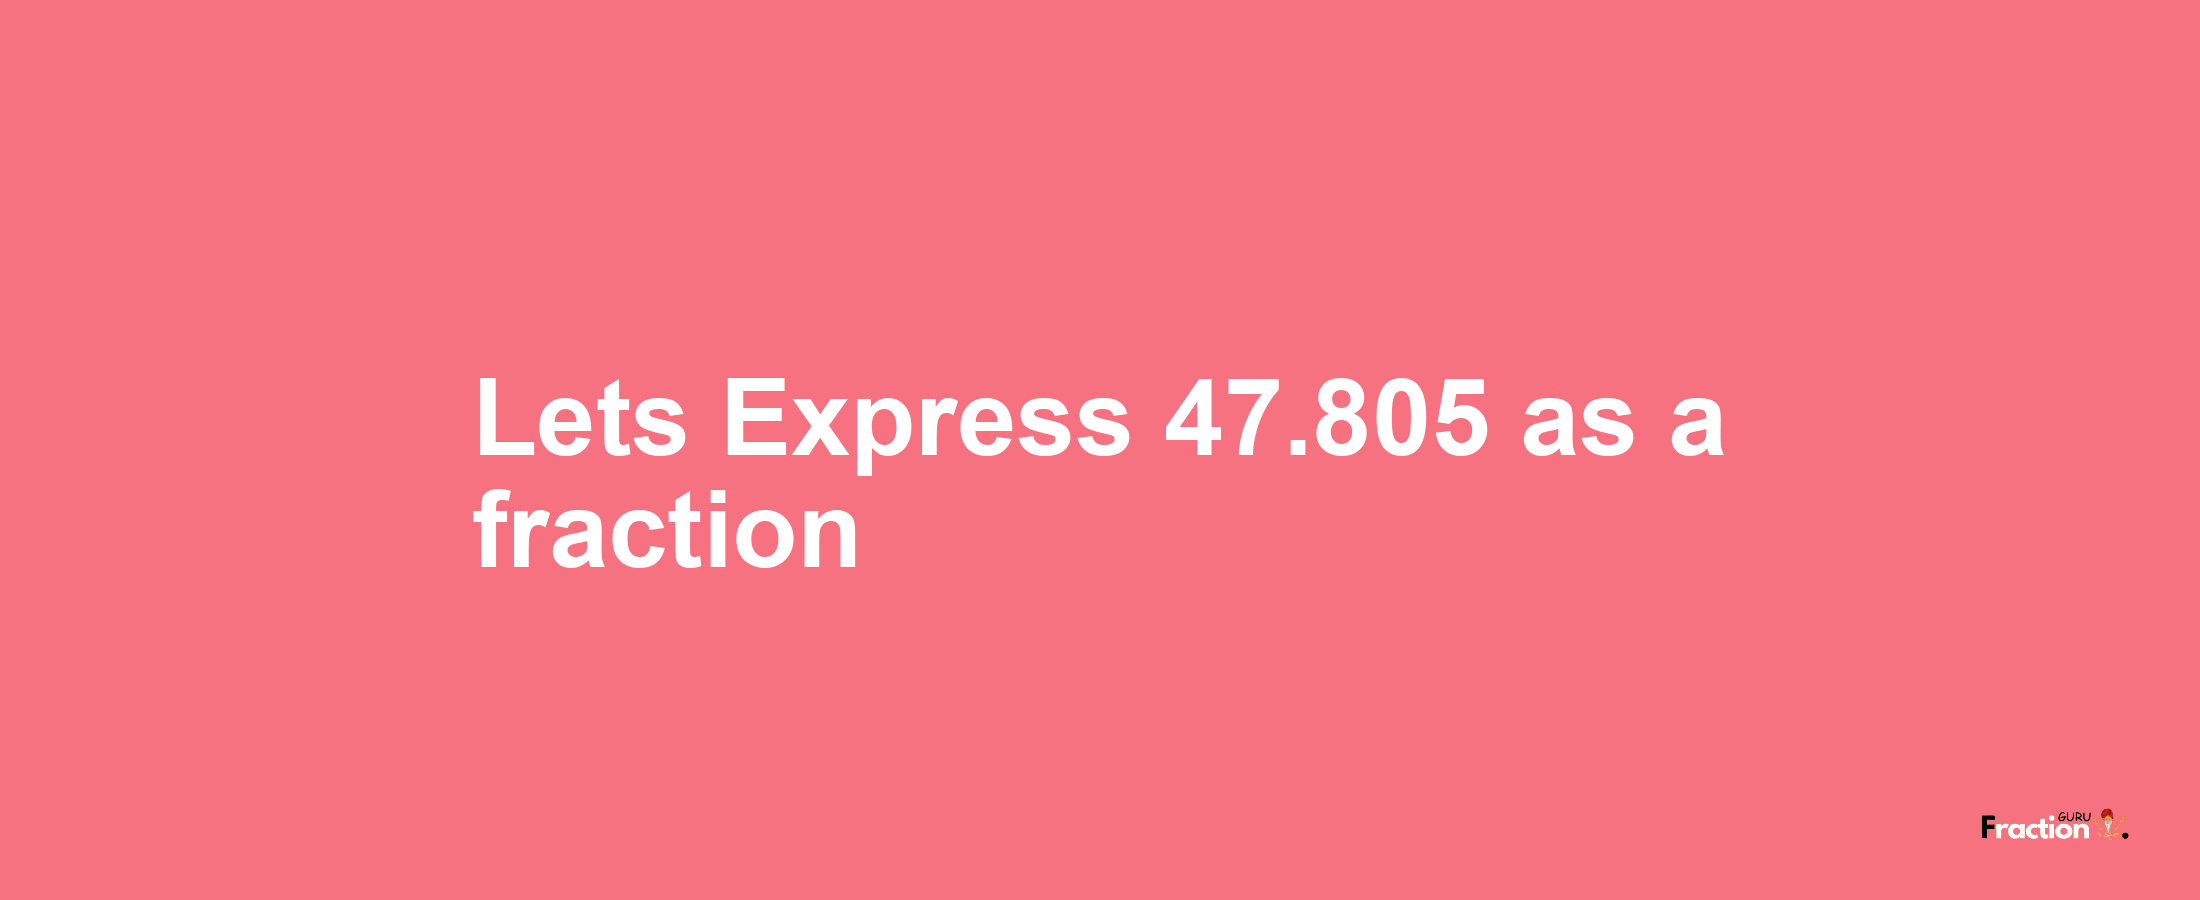 Lets Express 47.805 as afraction